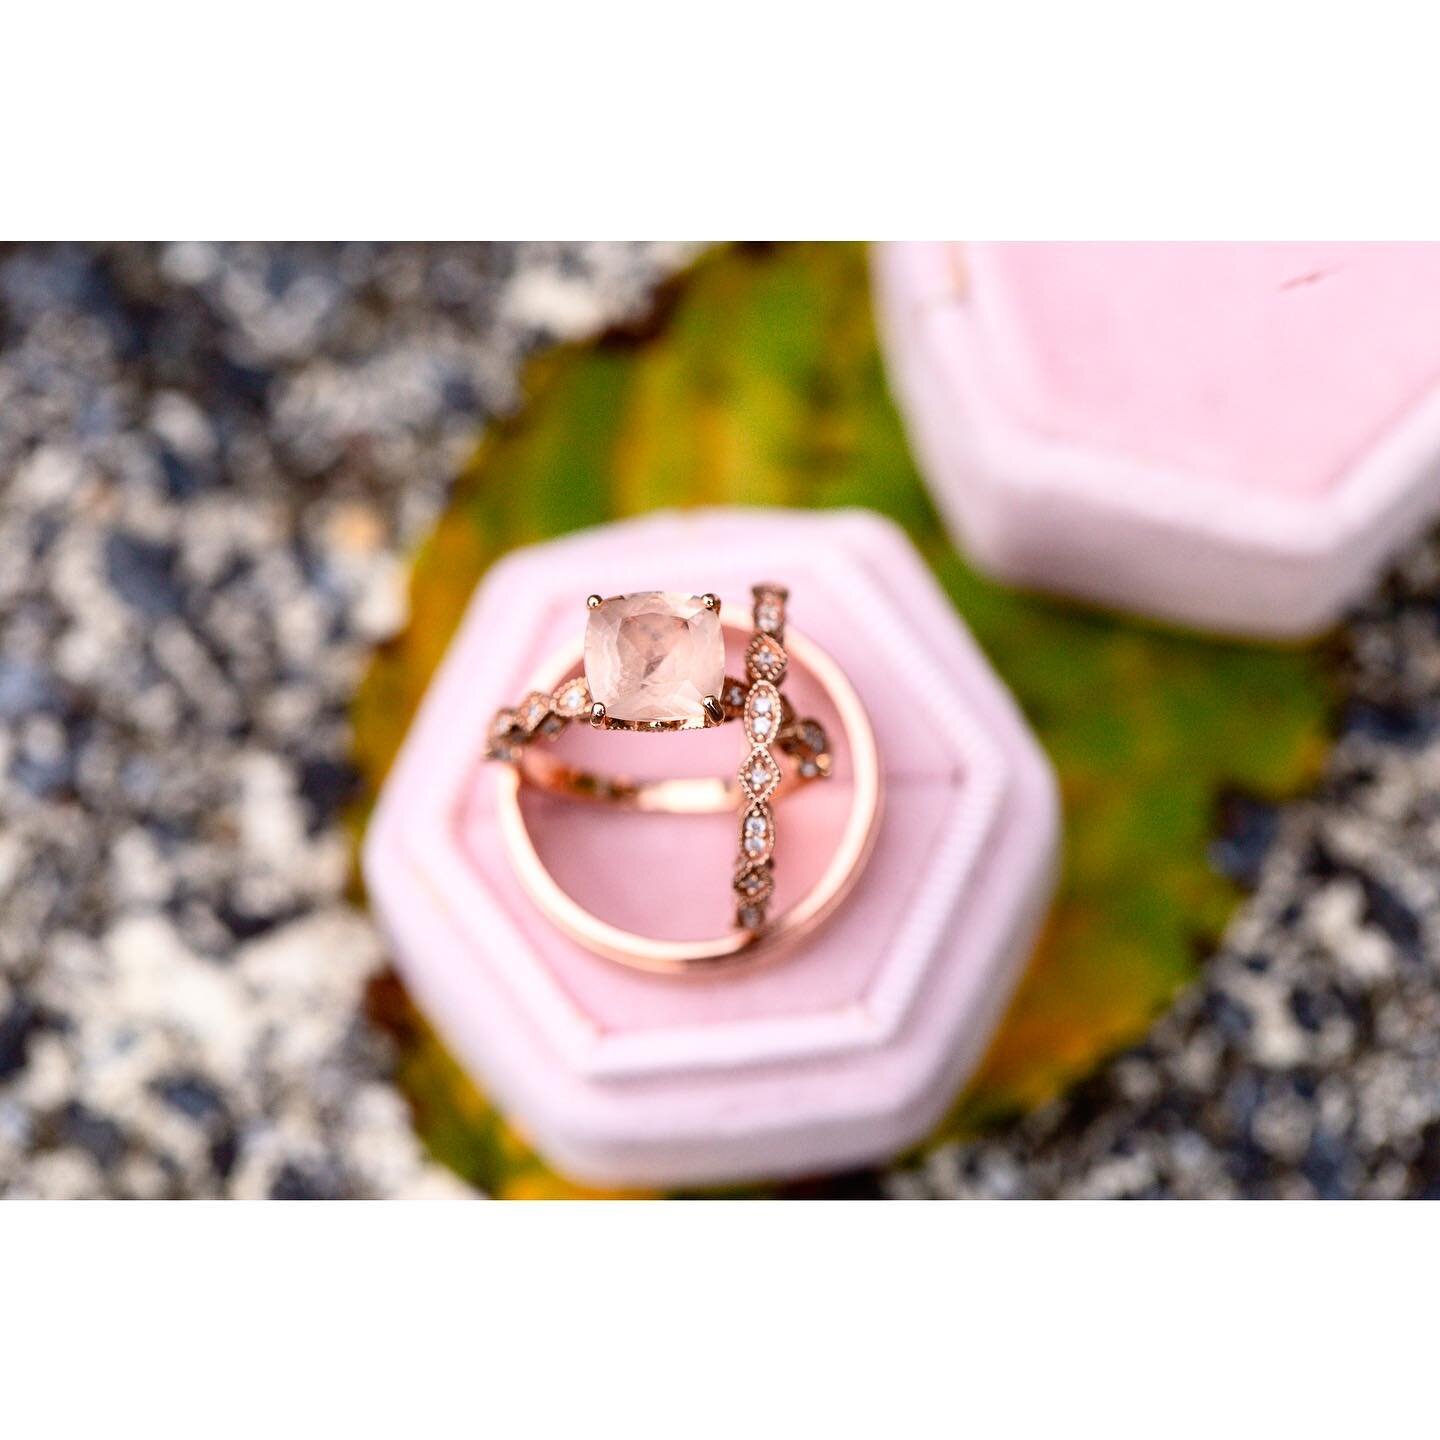 Pretty in Pink✨ anyone else love unique rings?! What kind of engagement do you have? #engagementrings #rosegoldrings #uniquejewelry #dowtownfrederick #frederickweddings